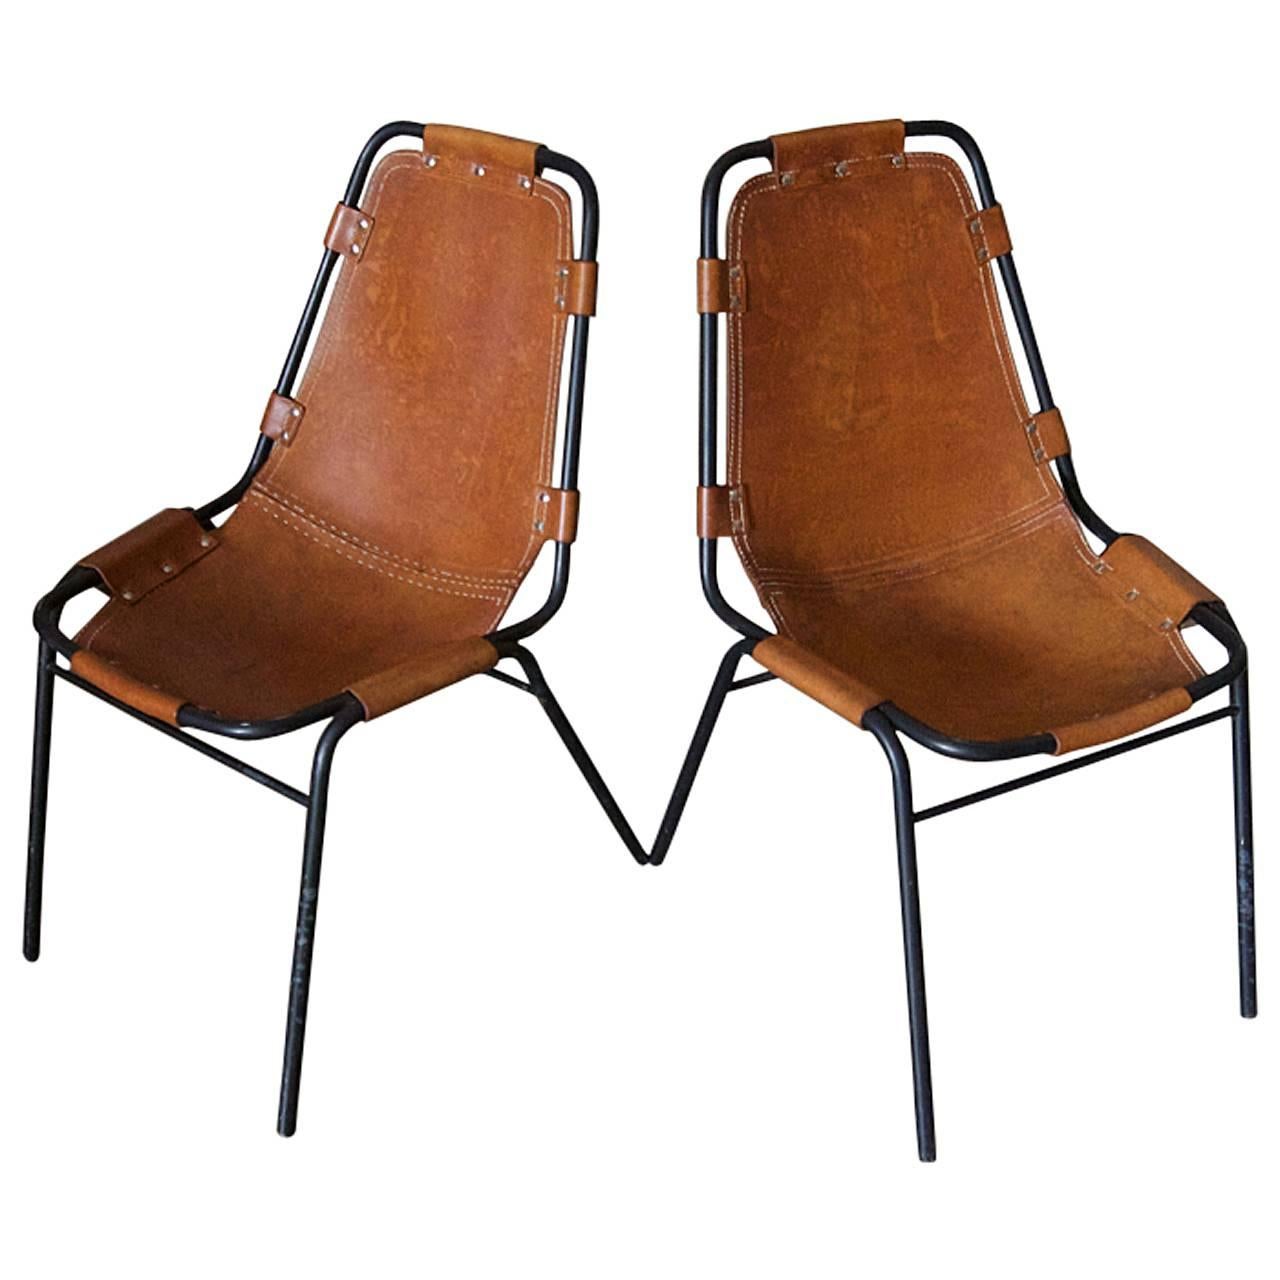 Vintage Pair of Chairs by Charlotte Perriand for Les Arcs